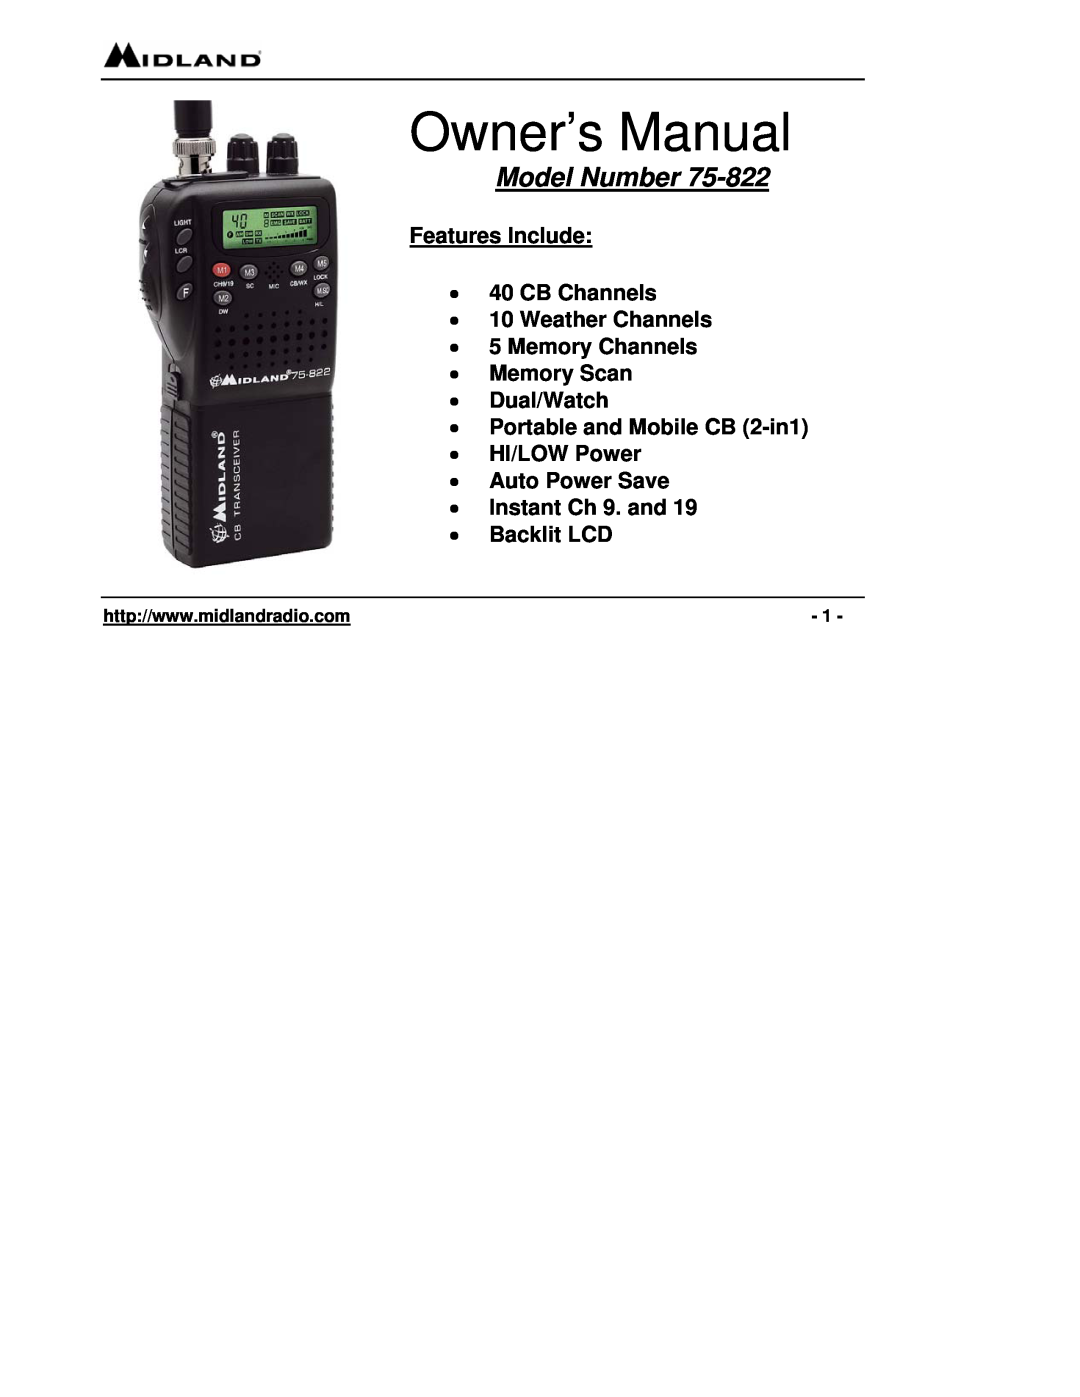 Midland Radio 75-822 owner manual Features Include 40 CB Channels 10 Weather Channels 5 Memory Channels, Model Number 